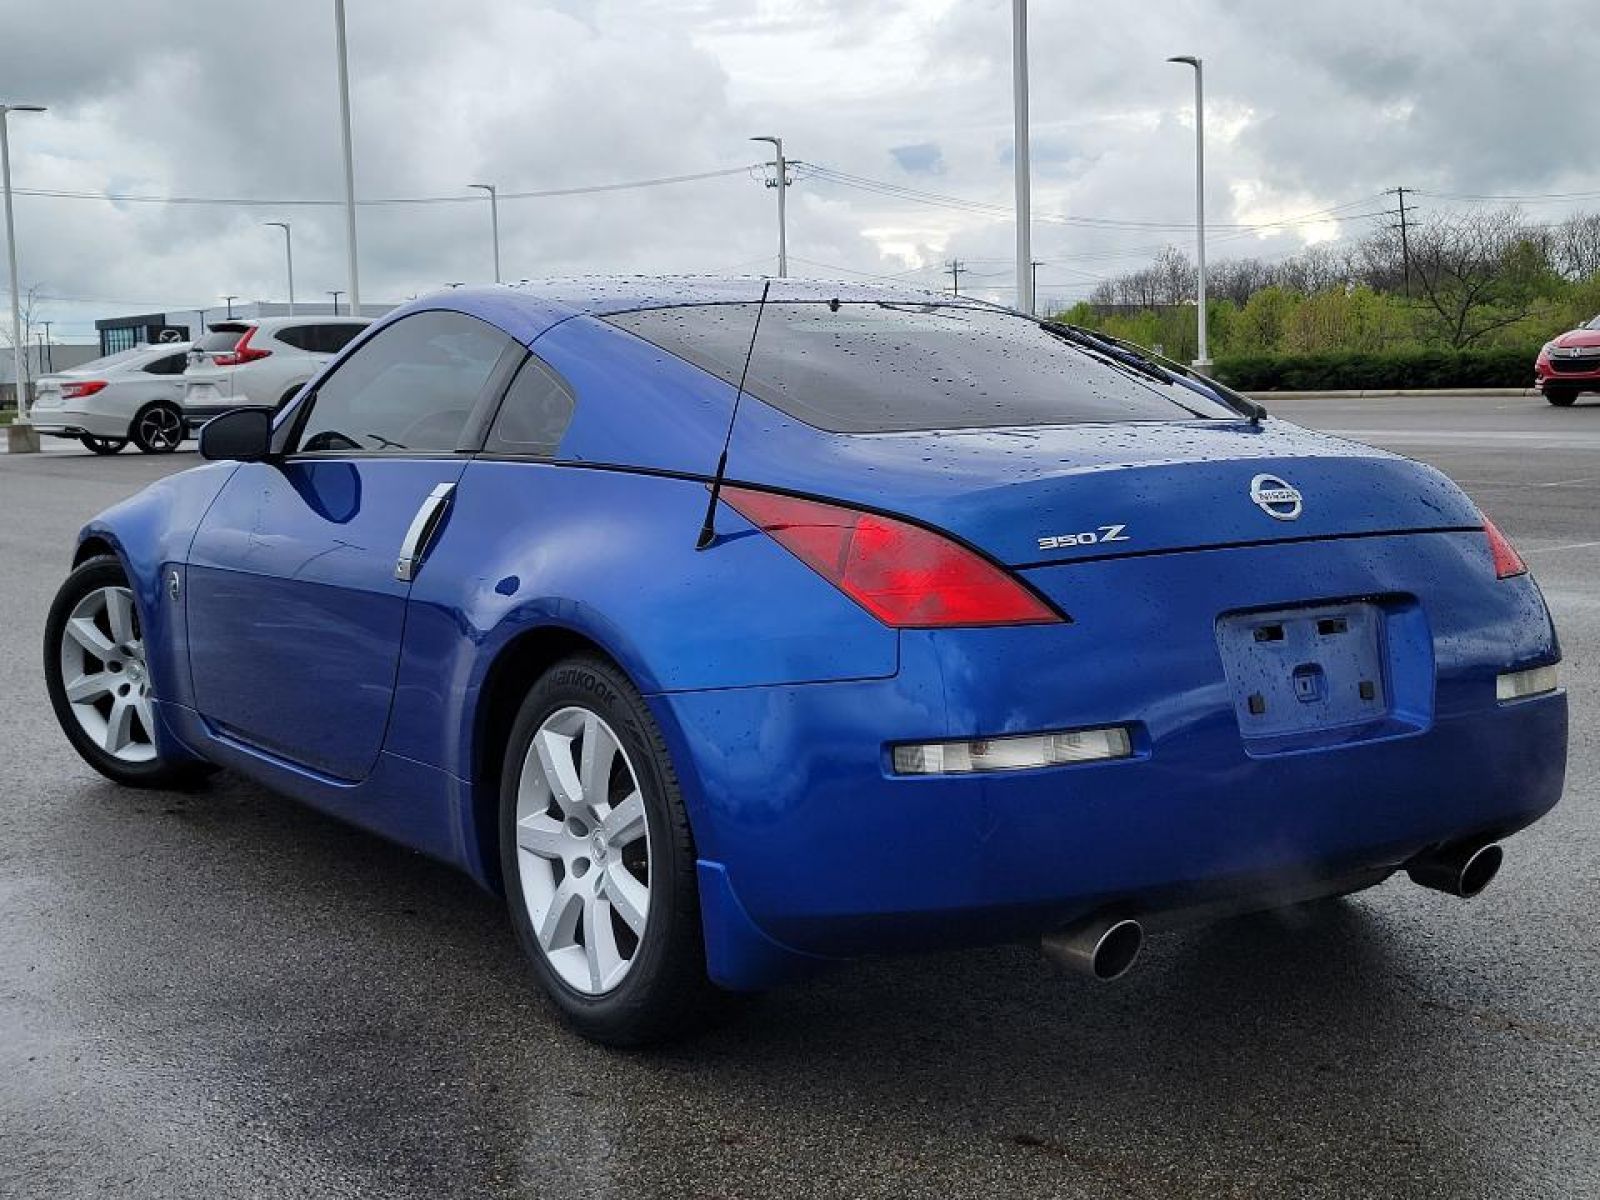 Used, 2004 Nissan 350Z Touring, Blue, P0511-9